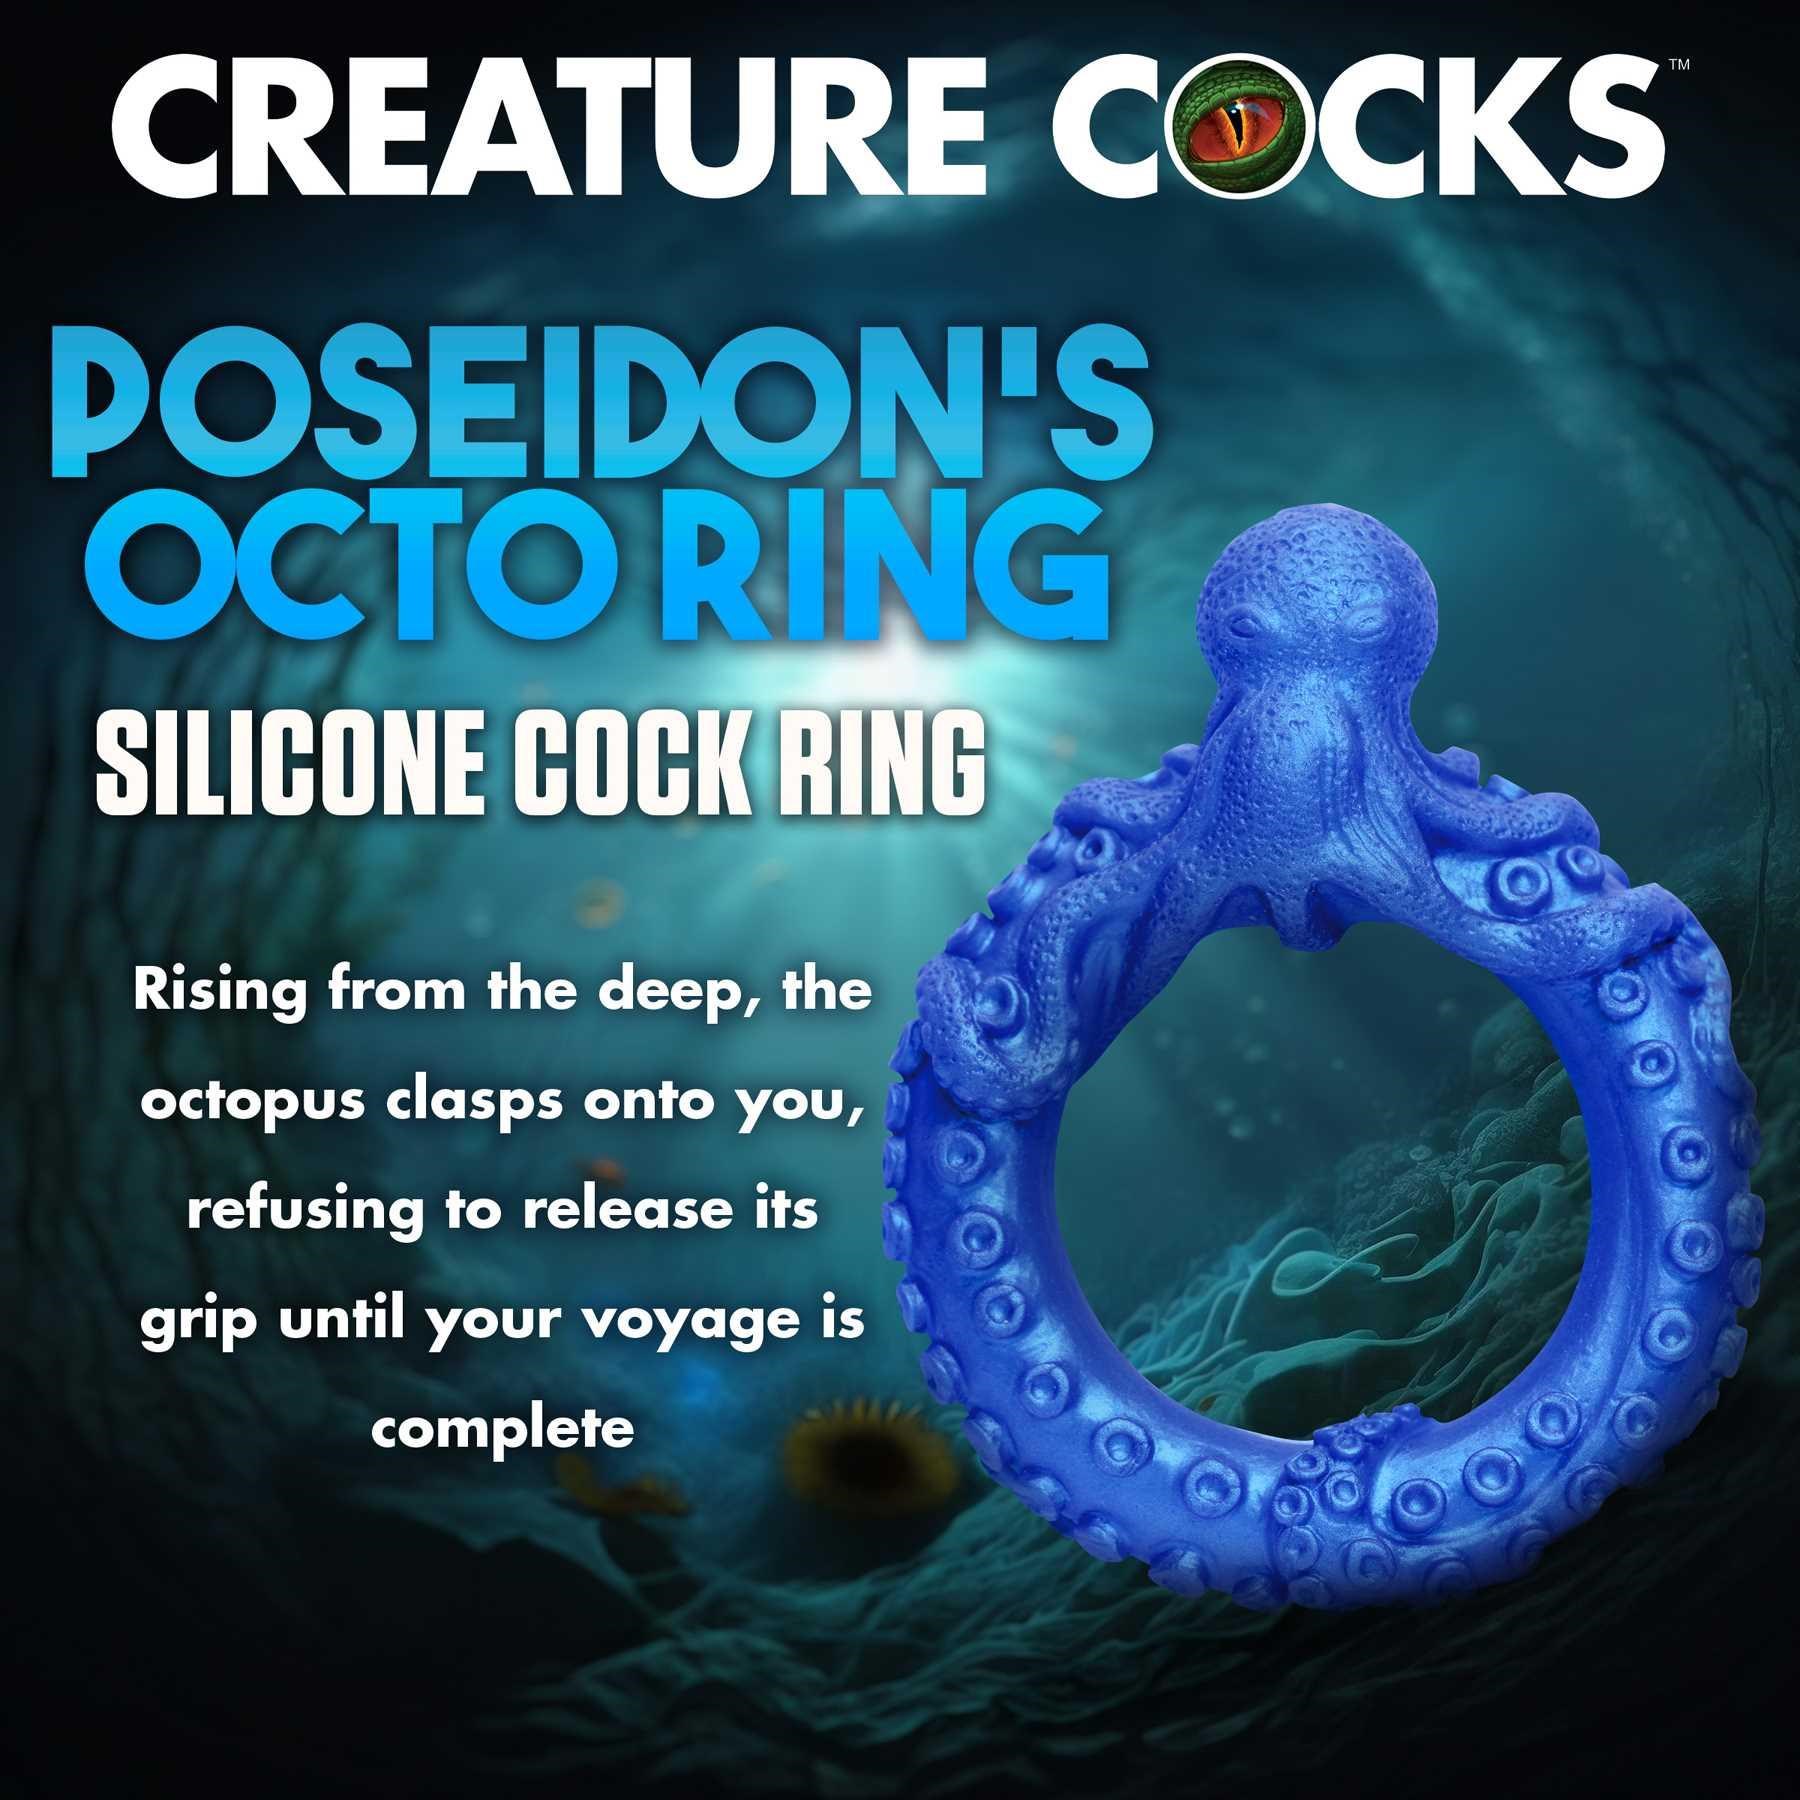 Creature Cocks Poseidon's Octo-Ring Silicone Cock Ring features call out sheet #3